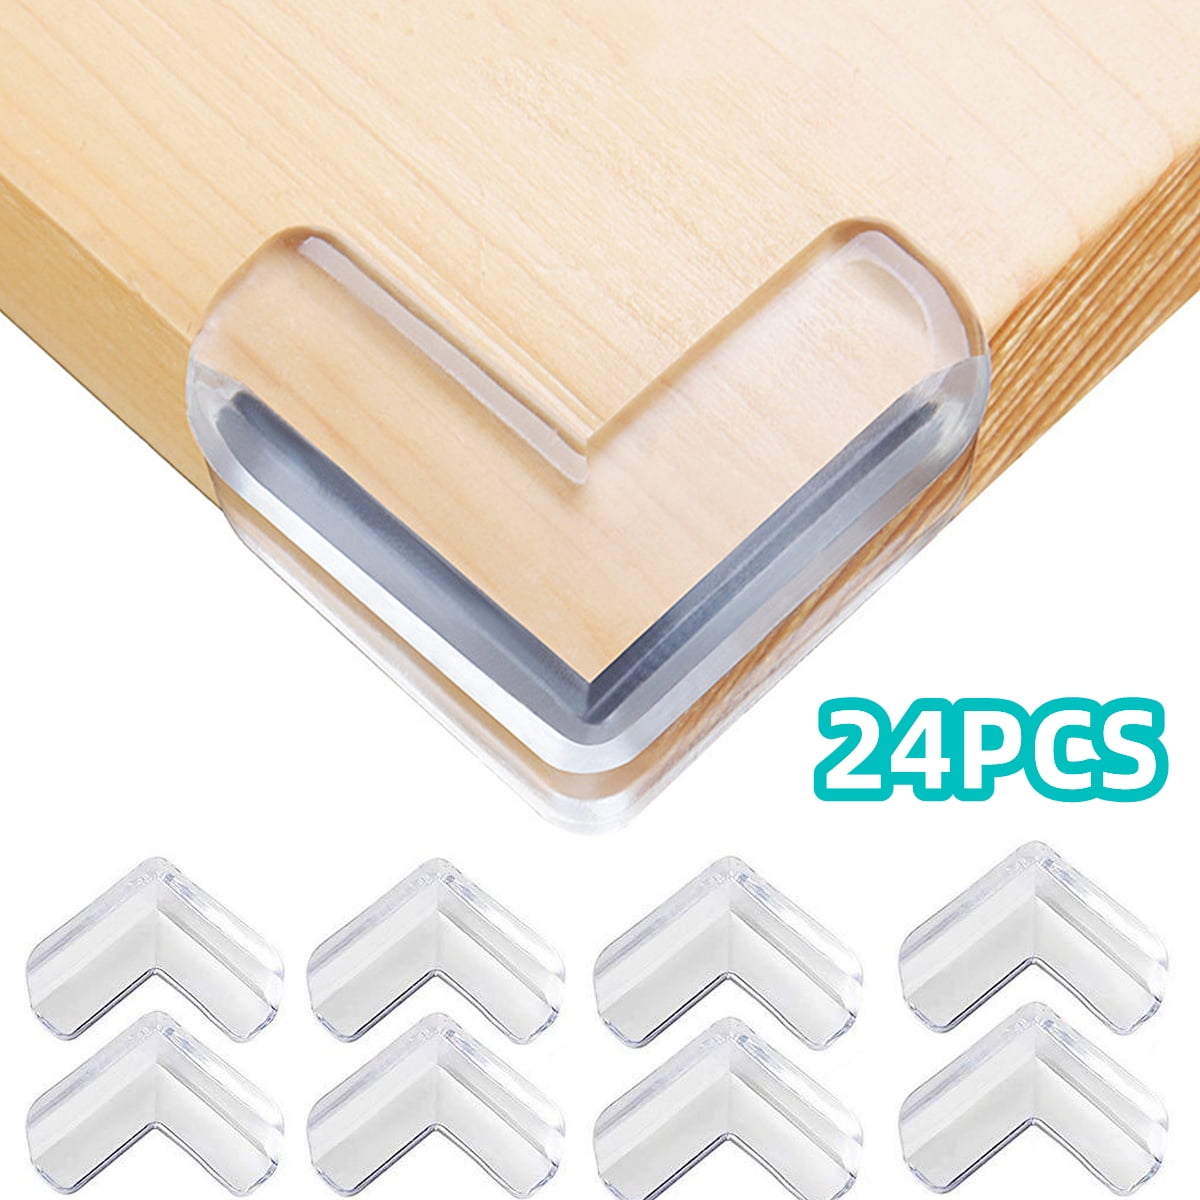 Suptree Table Corner Protectors for Furniture Baby Safety Proofing Corner Guards 24 Pack Round, Clear